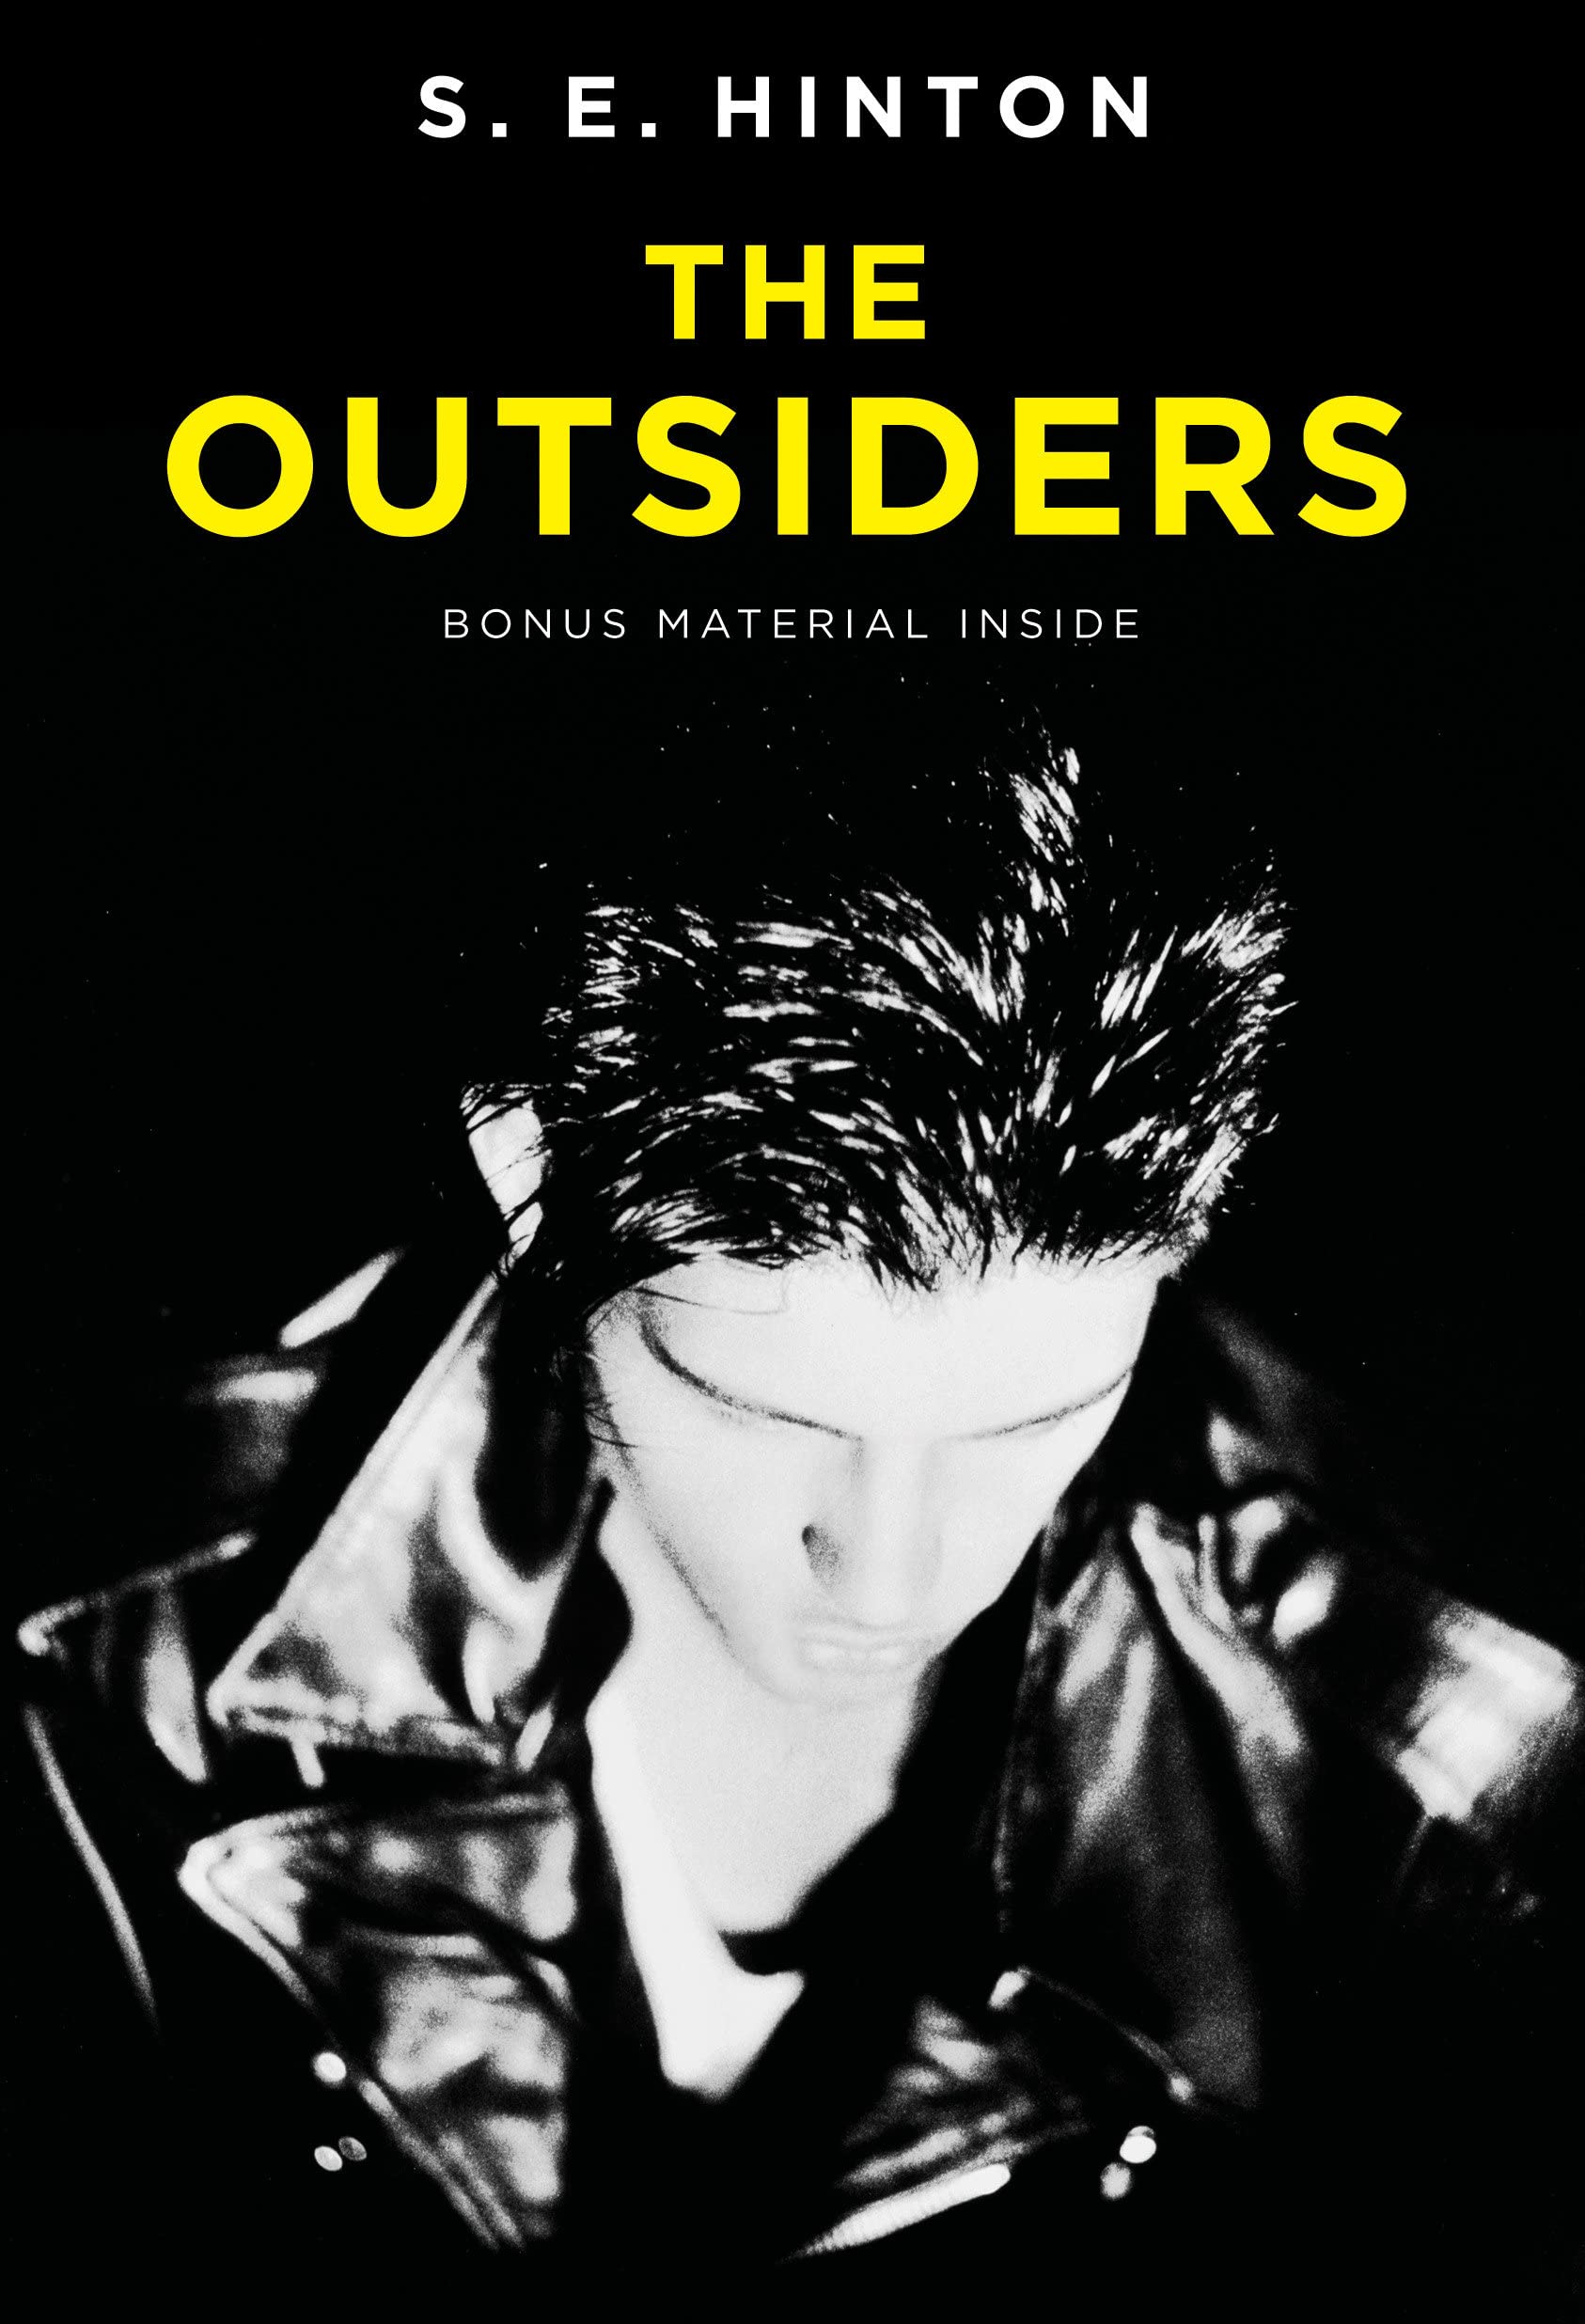 The Outsiders Paperback by S. E. Hinton